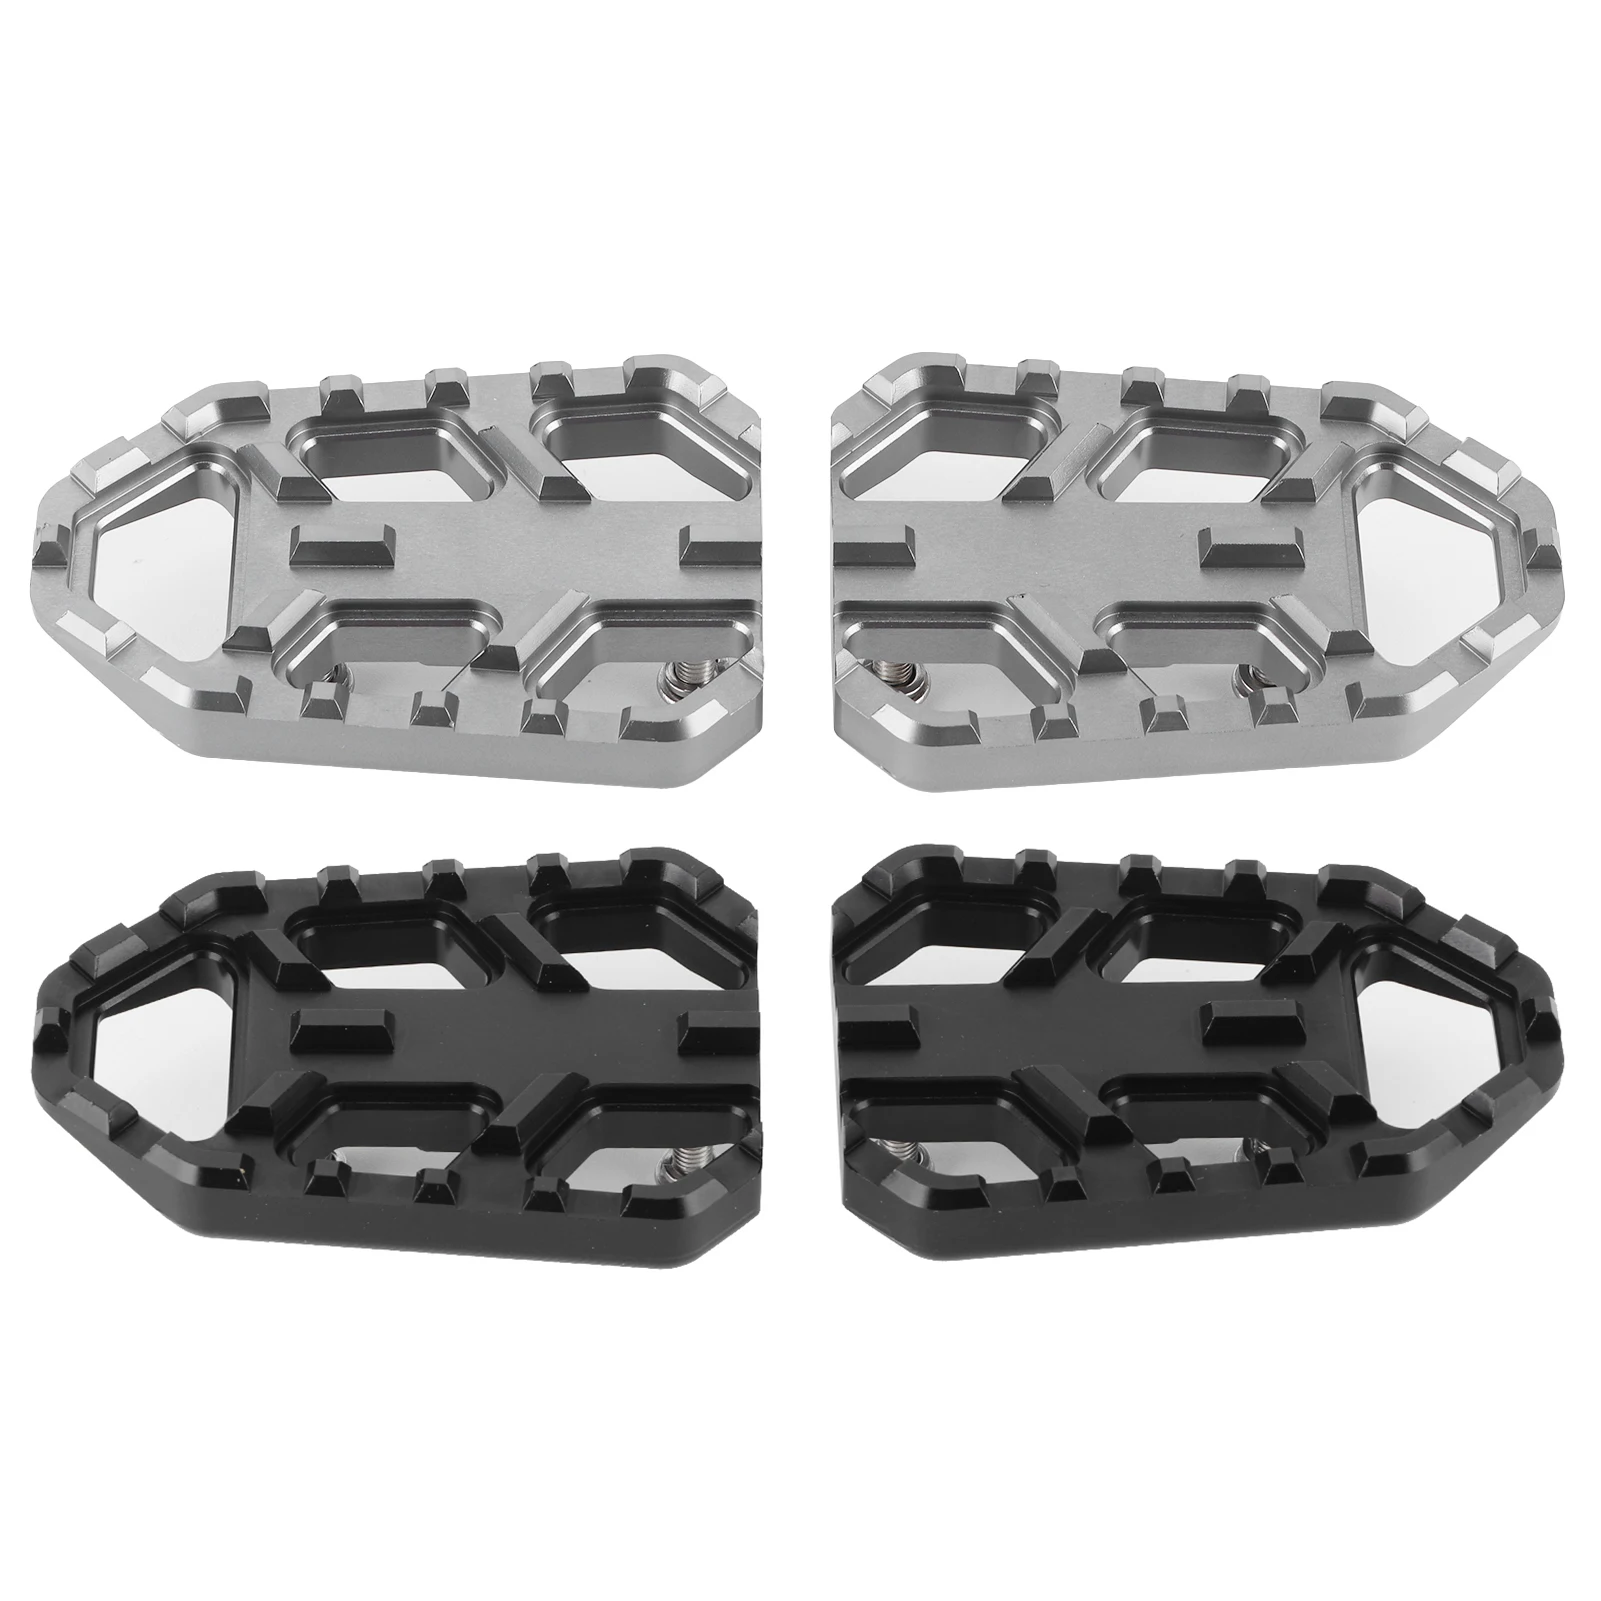  rest foot pegs motorcycle wide footrest cnc aluminum alloy pedals fit for suzuki dl650 thumb200